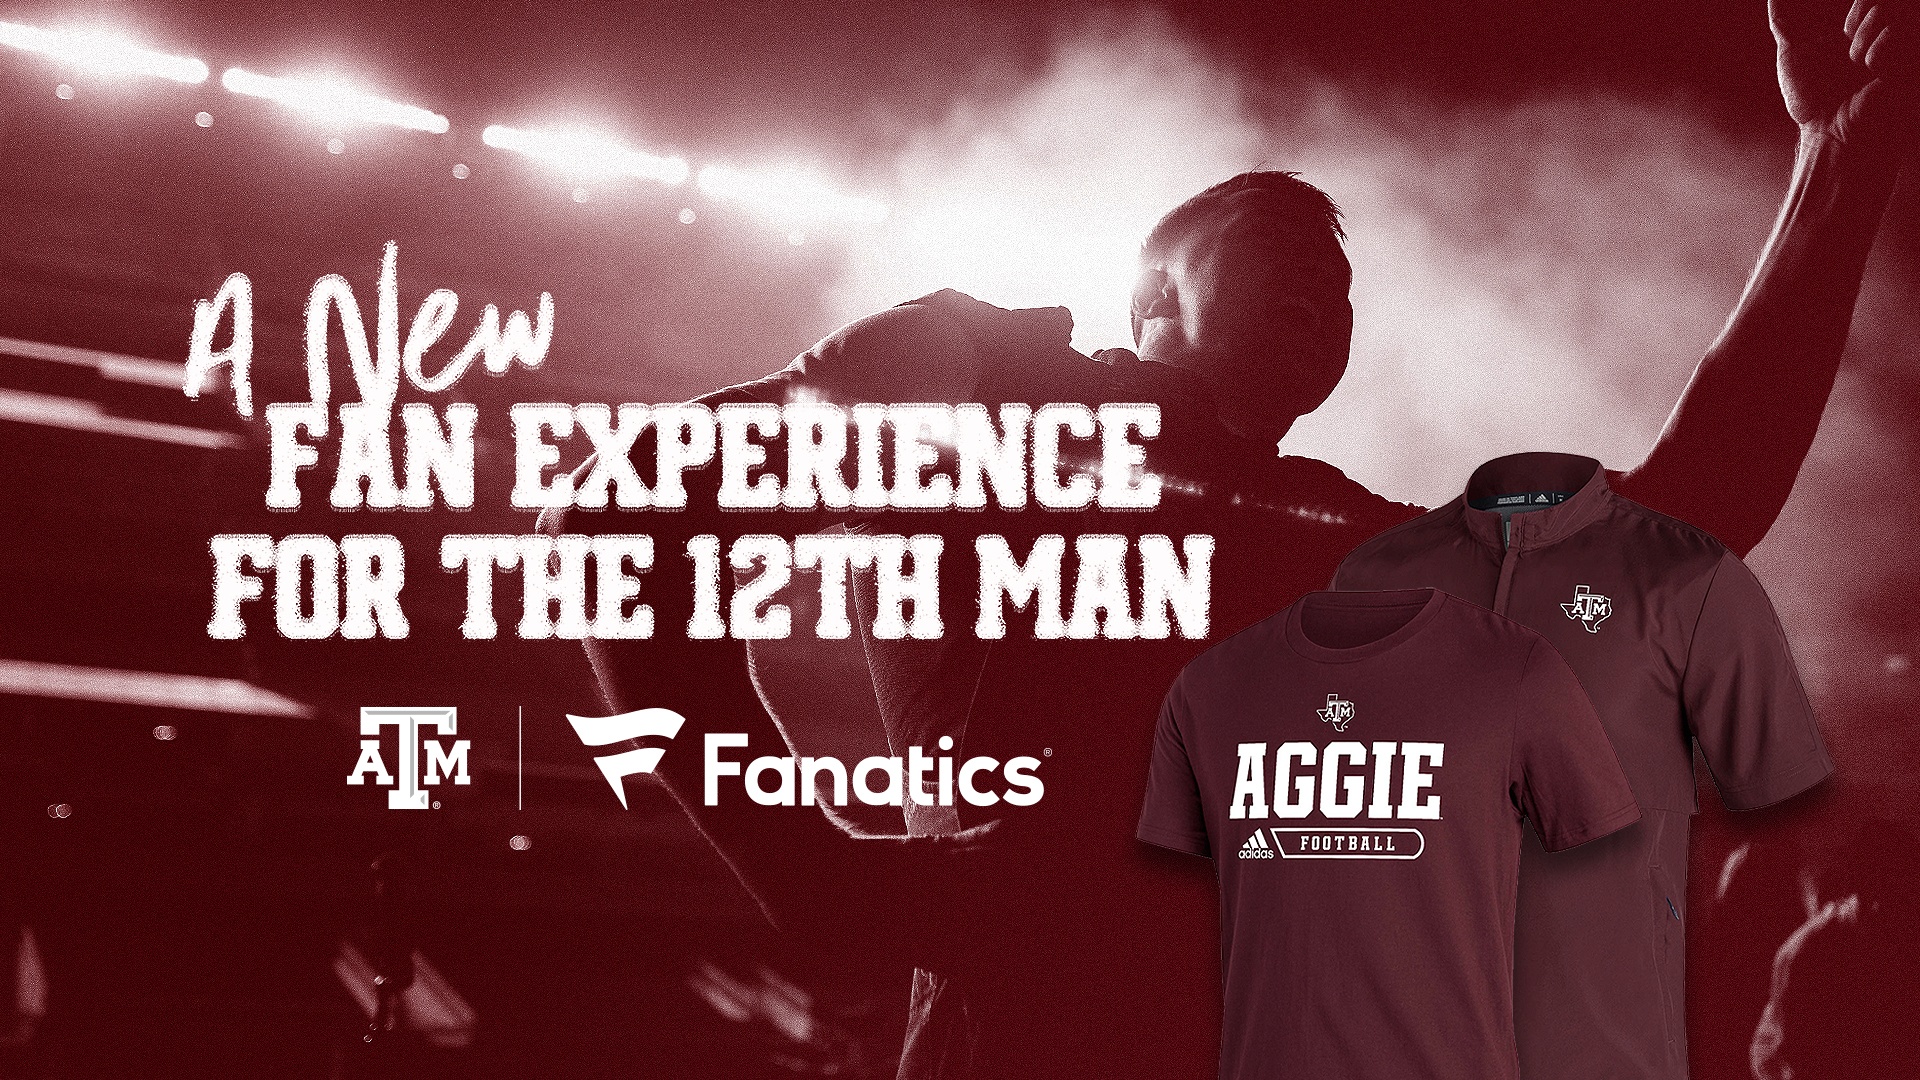 Texas A&M Fanatics partnership with mignight yell in the background